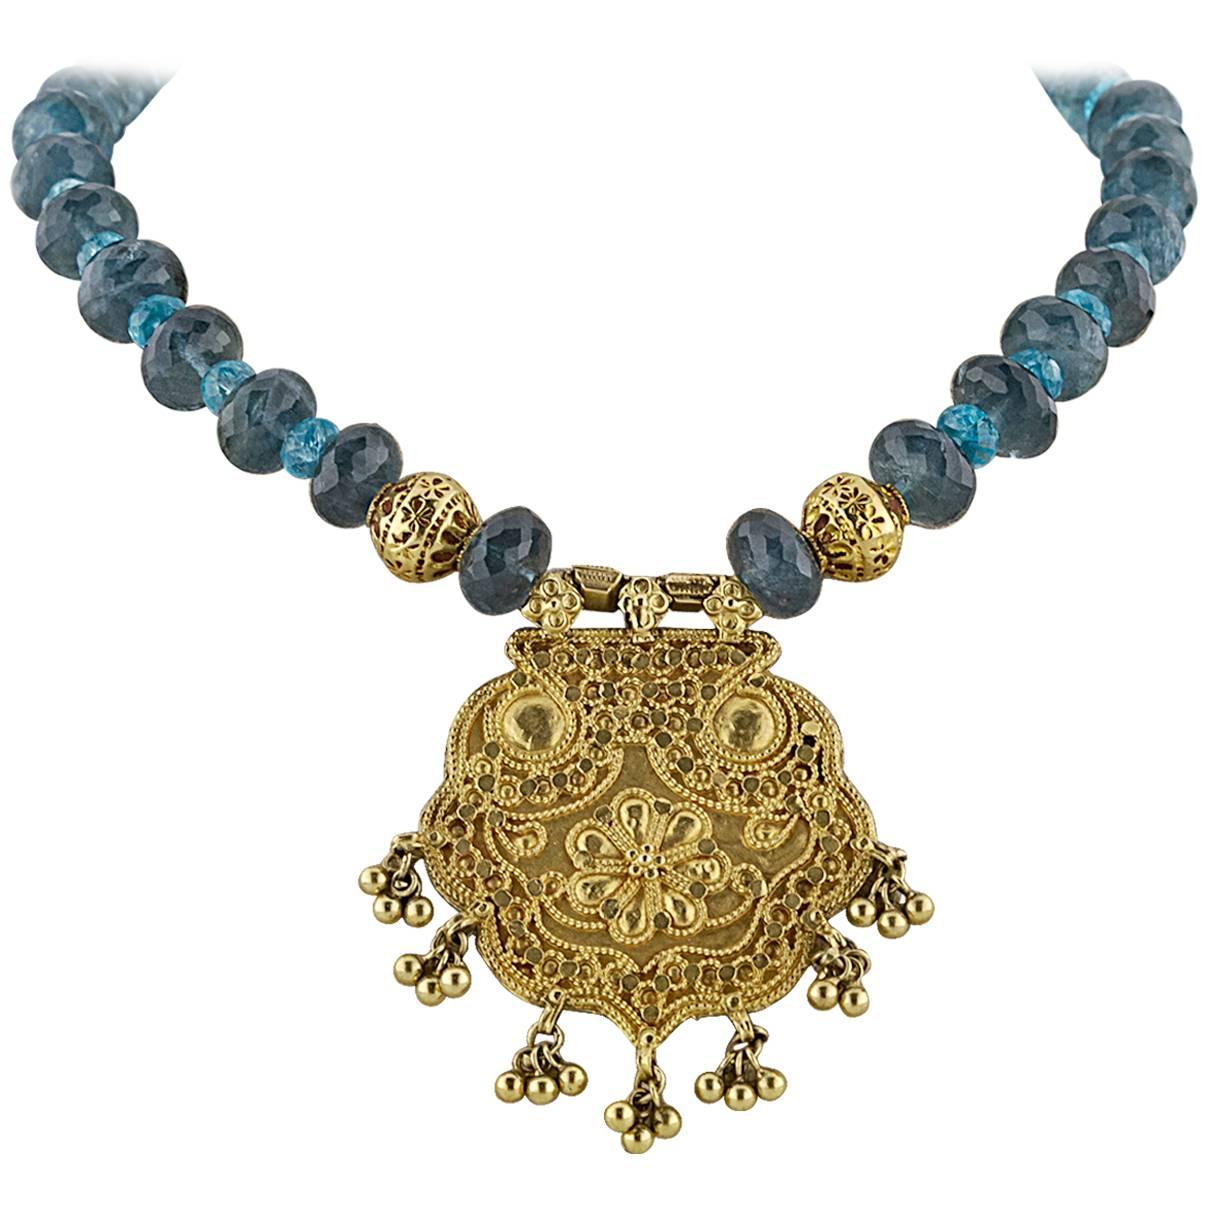 Moss Aquamarine Apatite Beaded Necklace with Gold Medallion